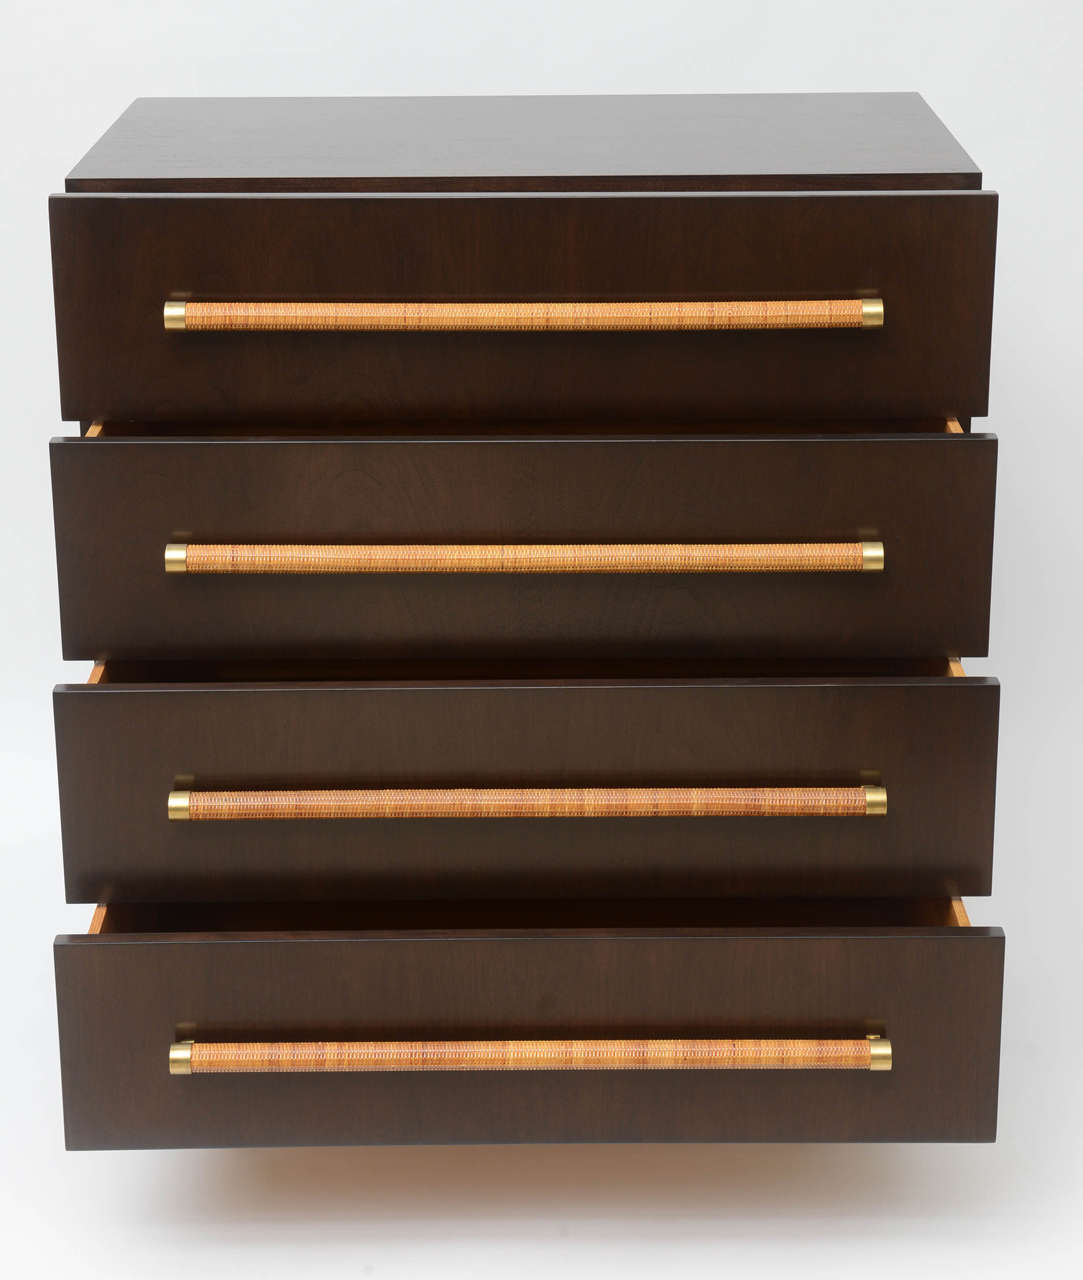 Brushed Tall Chest of Drawers by T. H. Robsjohn-Gibbings for Widdicomb